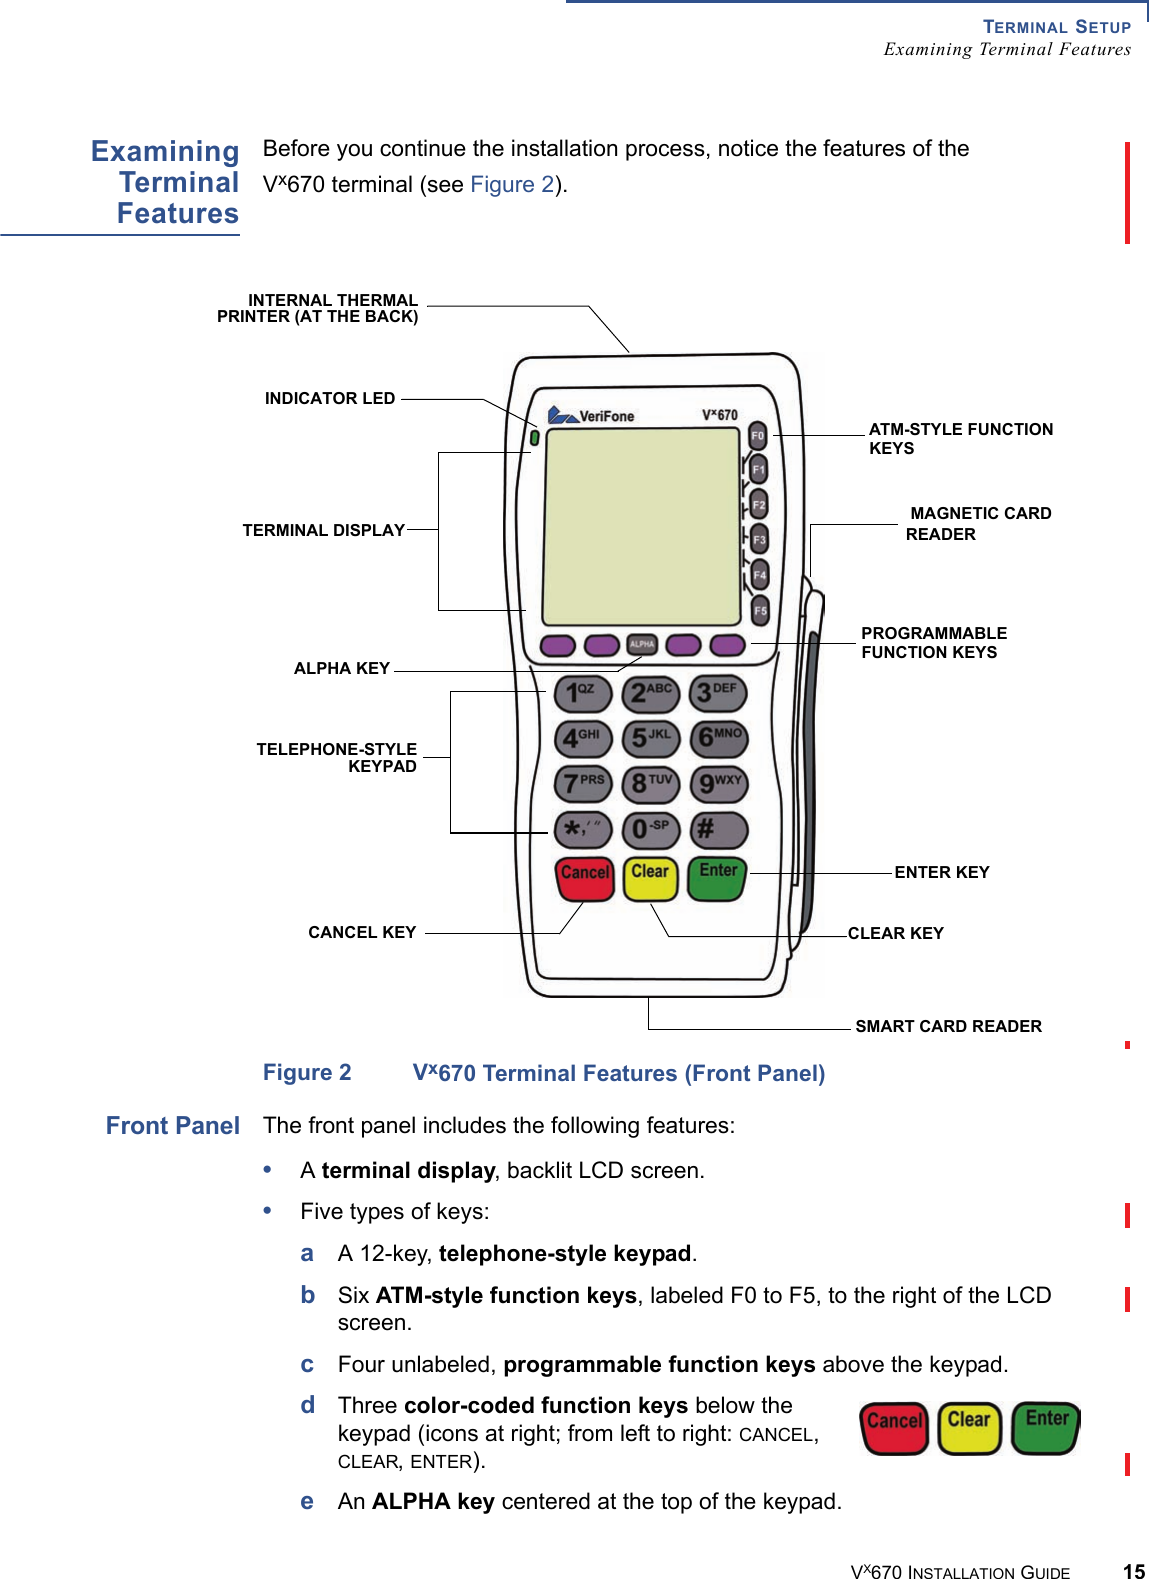 TERMINAL SETUPExamining Terminal FeaturesVX670 INSTALLATION GUIDE 15ExaminingTerminalFeaturesBefore you continue the installation process, notice the features of the Vx670 terminal (see Figure 2). Figure 2 Vx670 Terminal Features (Front Panel)Front PanelThe front panel includes the following features:•A terminal display, backlit LCD screen.•Five types of keys:aA 12-key, telephone-style keypad.bSix ATM-style function keys, labeled F0 to F5, to the right of the LCD screen.cFour unlabeled, programmable function keys above the keypad.dThree color-coded function keys below the keypad (icons at right; from left to right: CANCEL, CLEAR, ENTER). eAn ALPHA key centered at the top of the keypad.TERMINAL DISPLAYMAGNETIC CARDTELEPHONE-STYLEKEYPADCANCEL KEY CLEAR KEYENTER KEYPROGRAMMABLE ATM-STYLE FUNCTIONALPHA KEYSMART CARD READERINDICATOR LEDINTERNAL THERMALPRINTER (AT THE BACK) FUNCTION KEYSKEYS READER